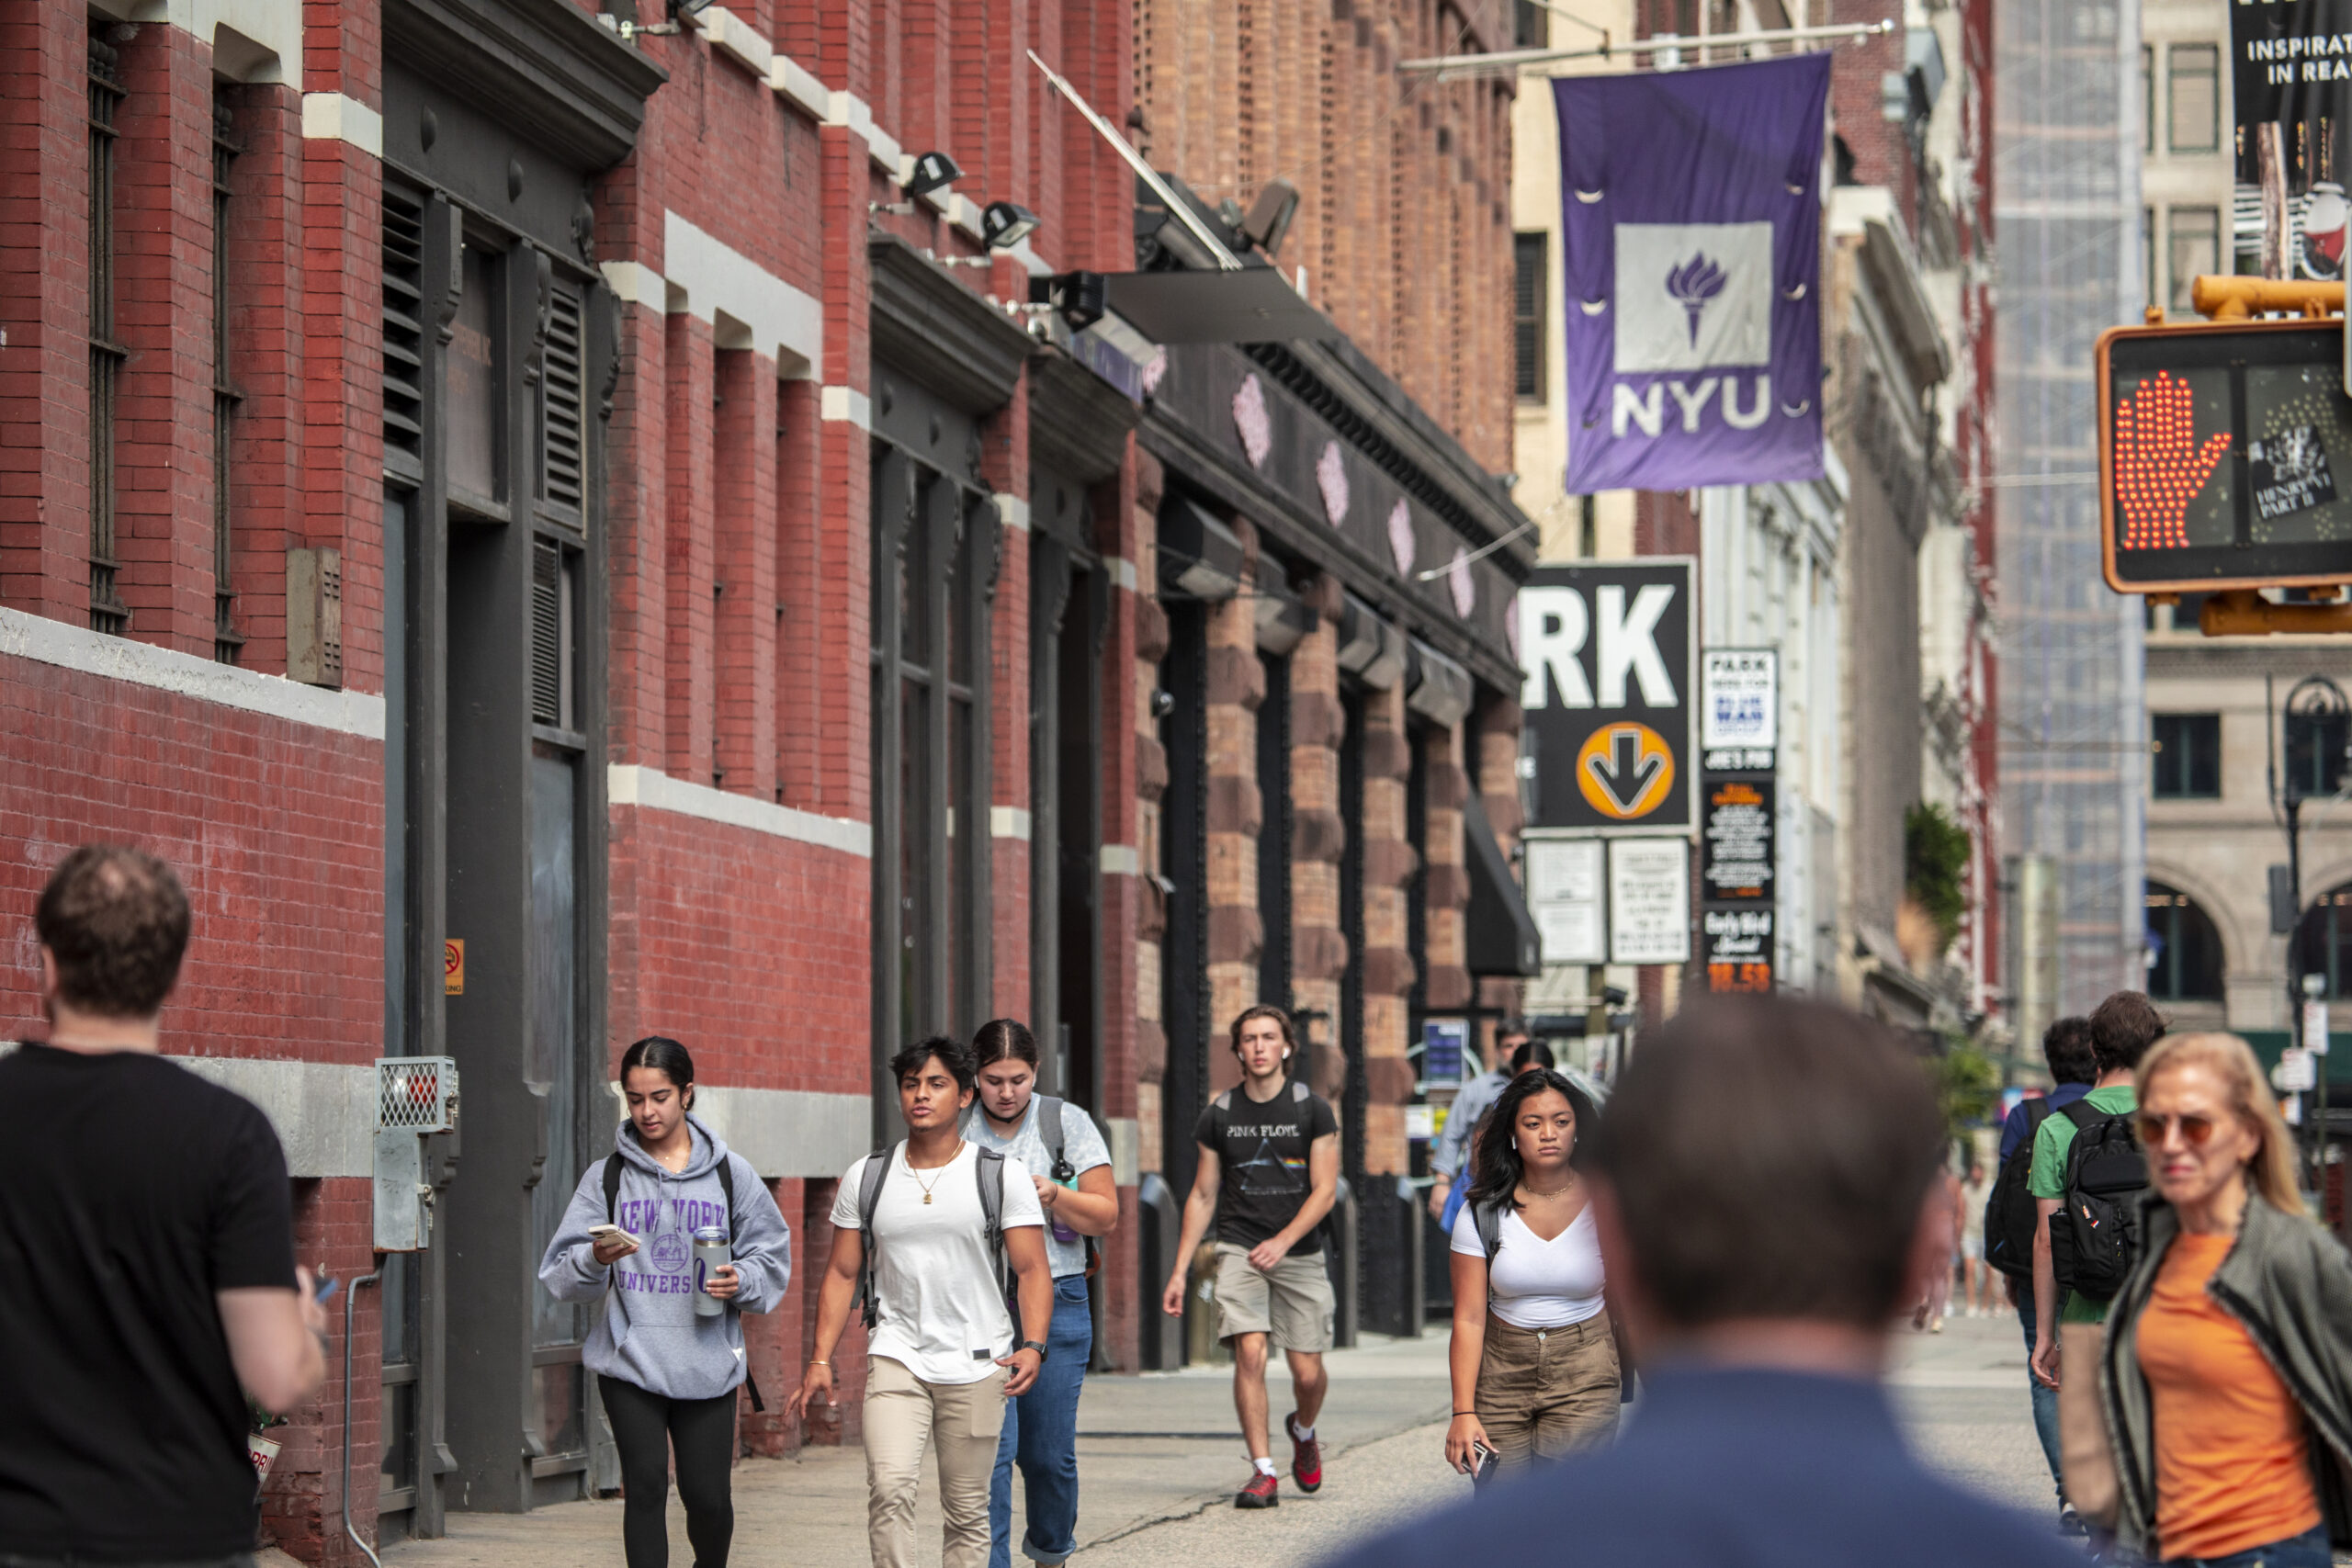 Students on a busy street on NYU’s campus in New York City.